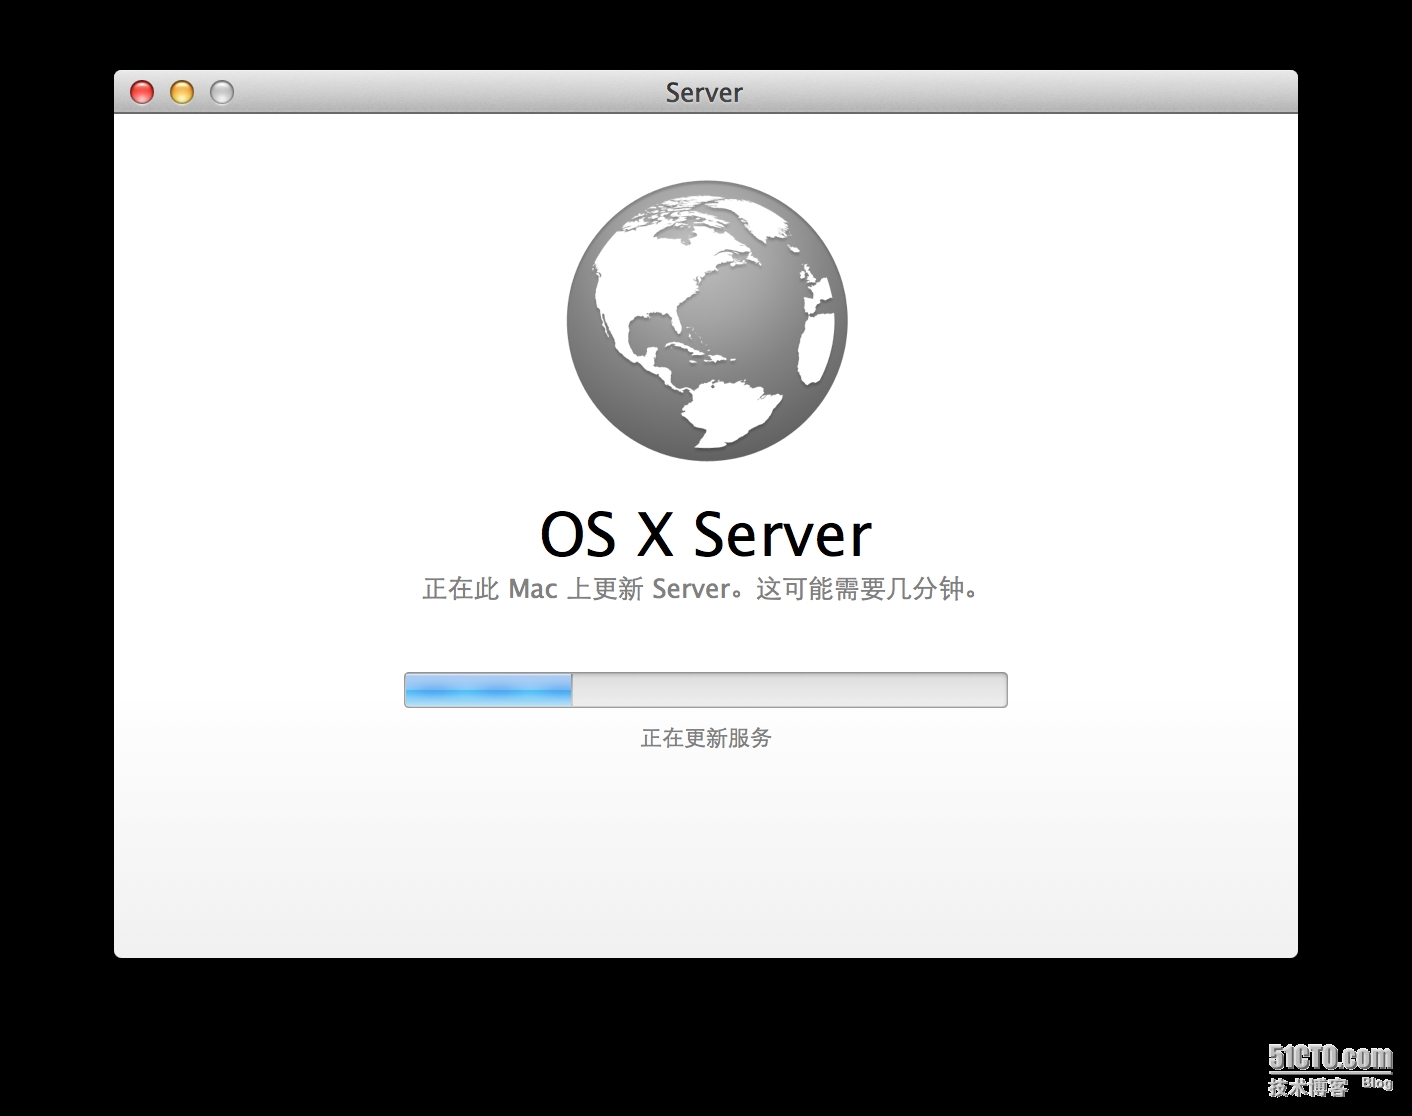 How to Change DNS Server Settings in Mac OS X